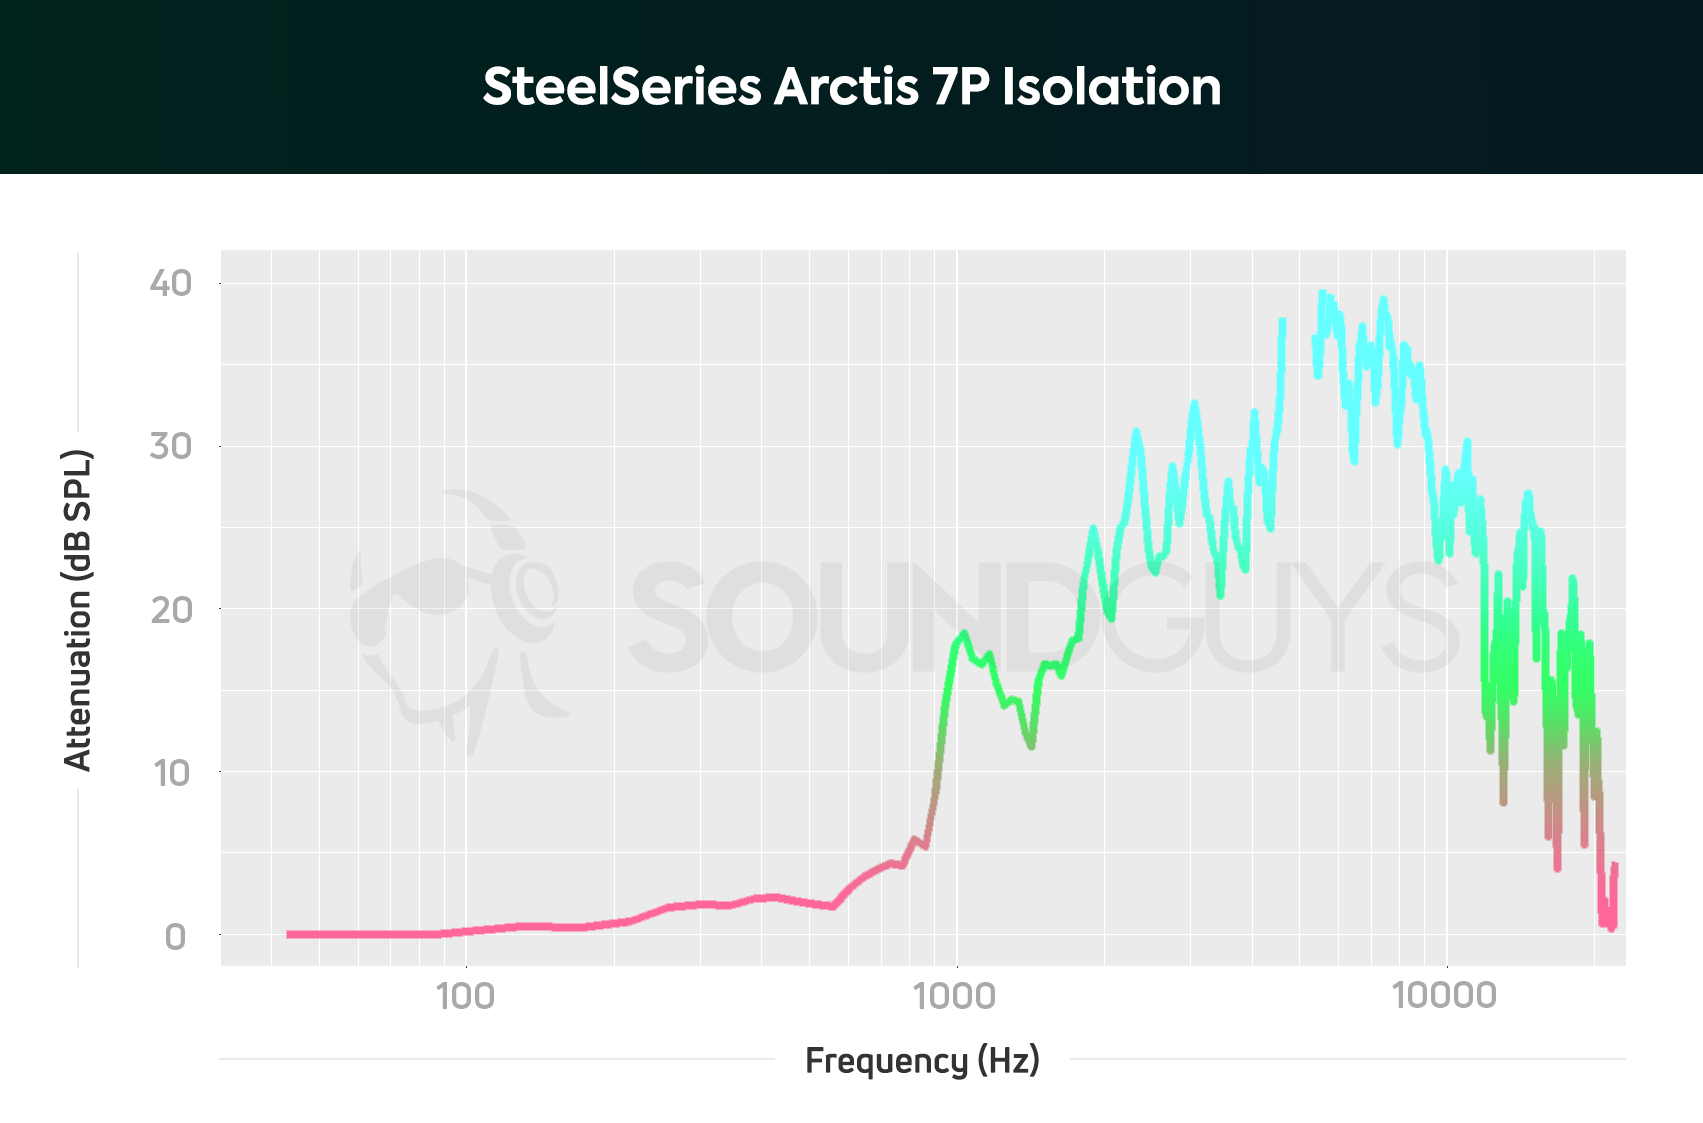 An isolation chart for the SteelSeries Arctis 7P, which shows pretty average attenuation for a gaming headset